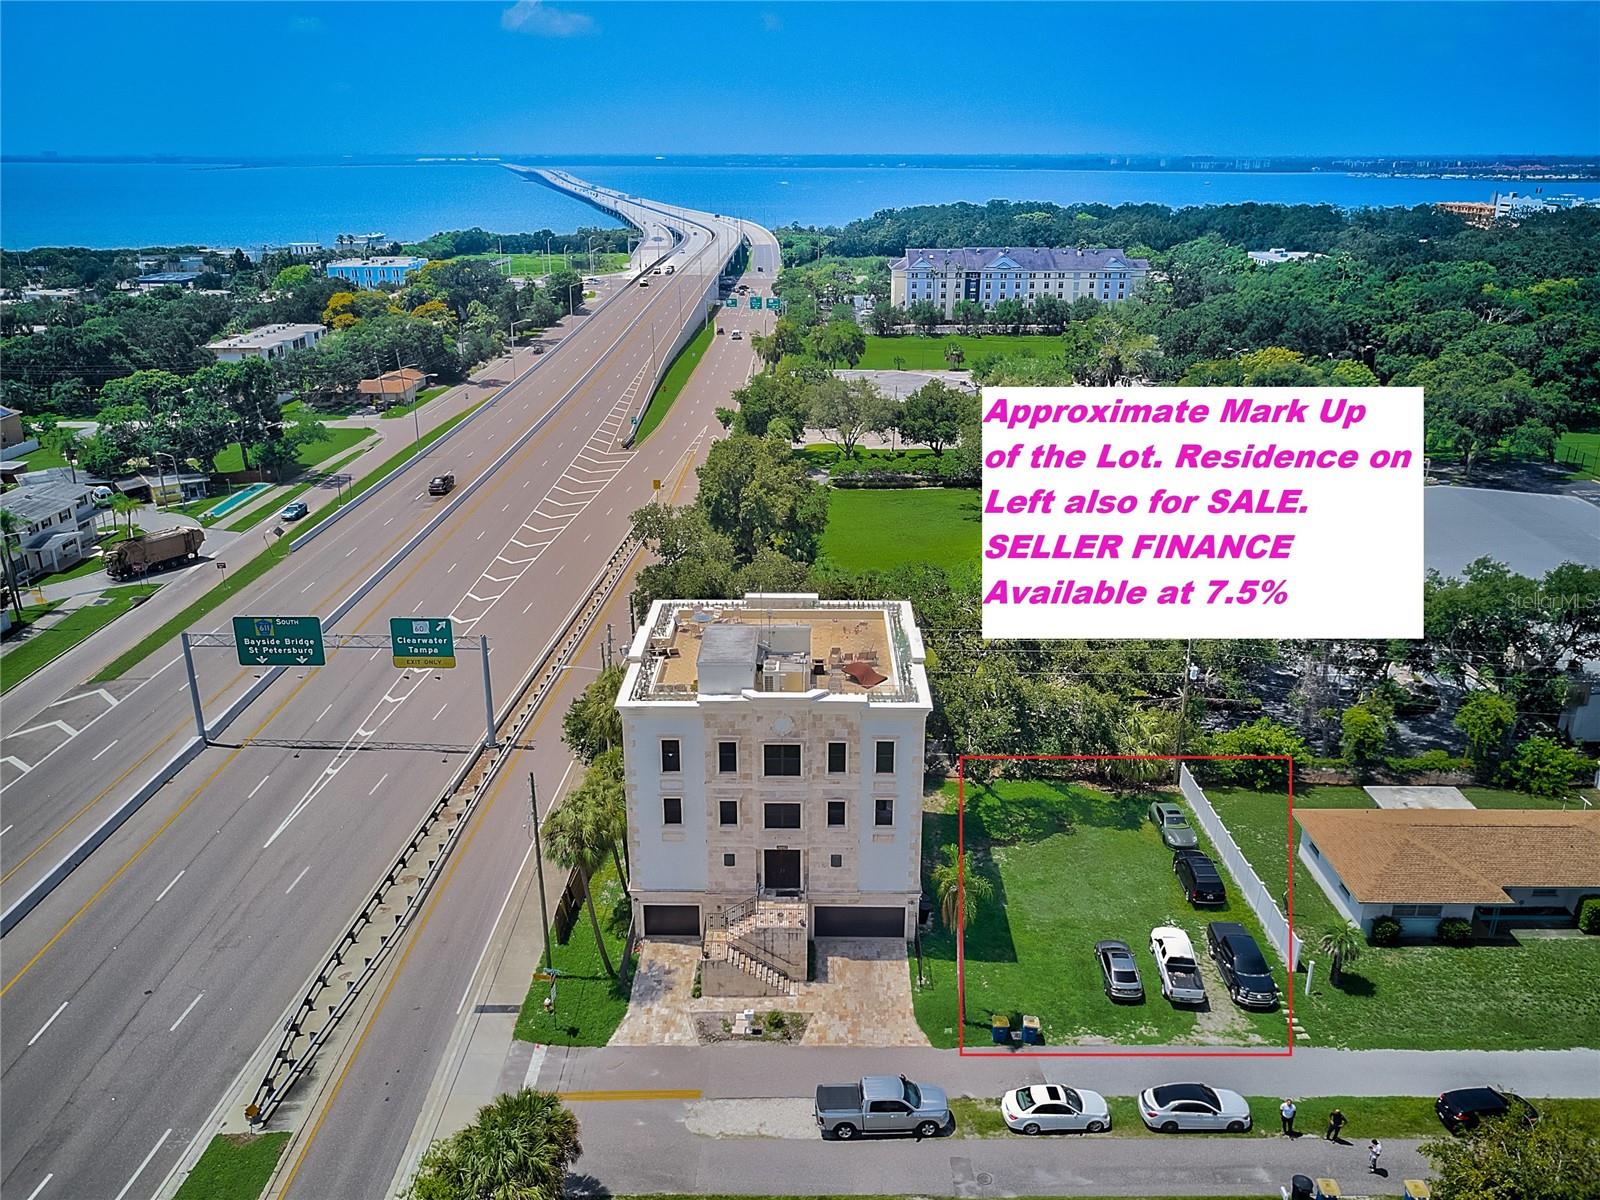 This listing includes BOTH parcels including the marked lot on the right and lot on the left with the Race Car Mansion